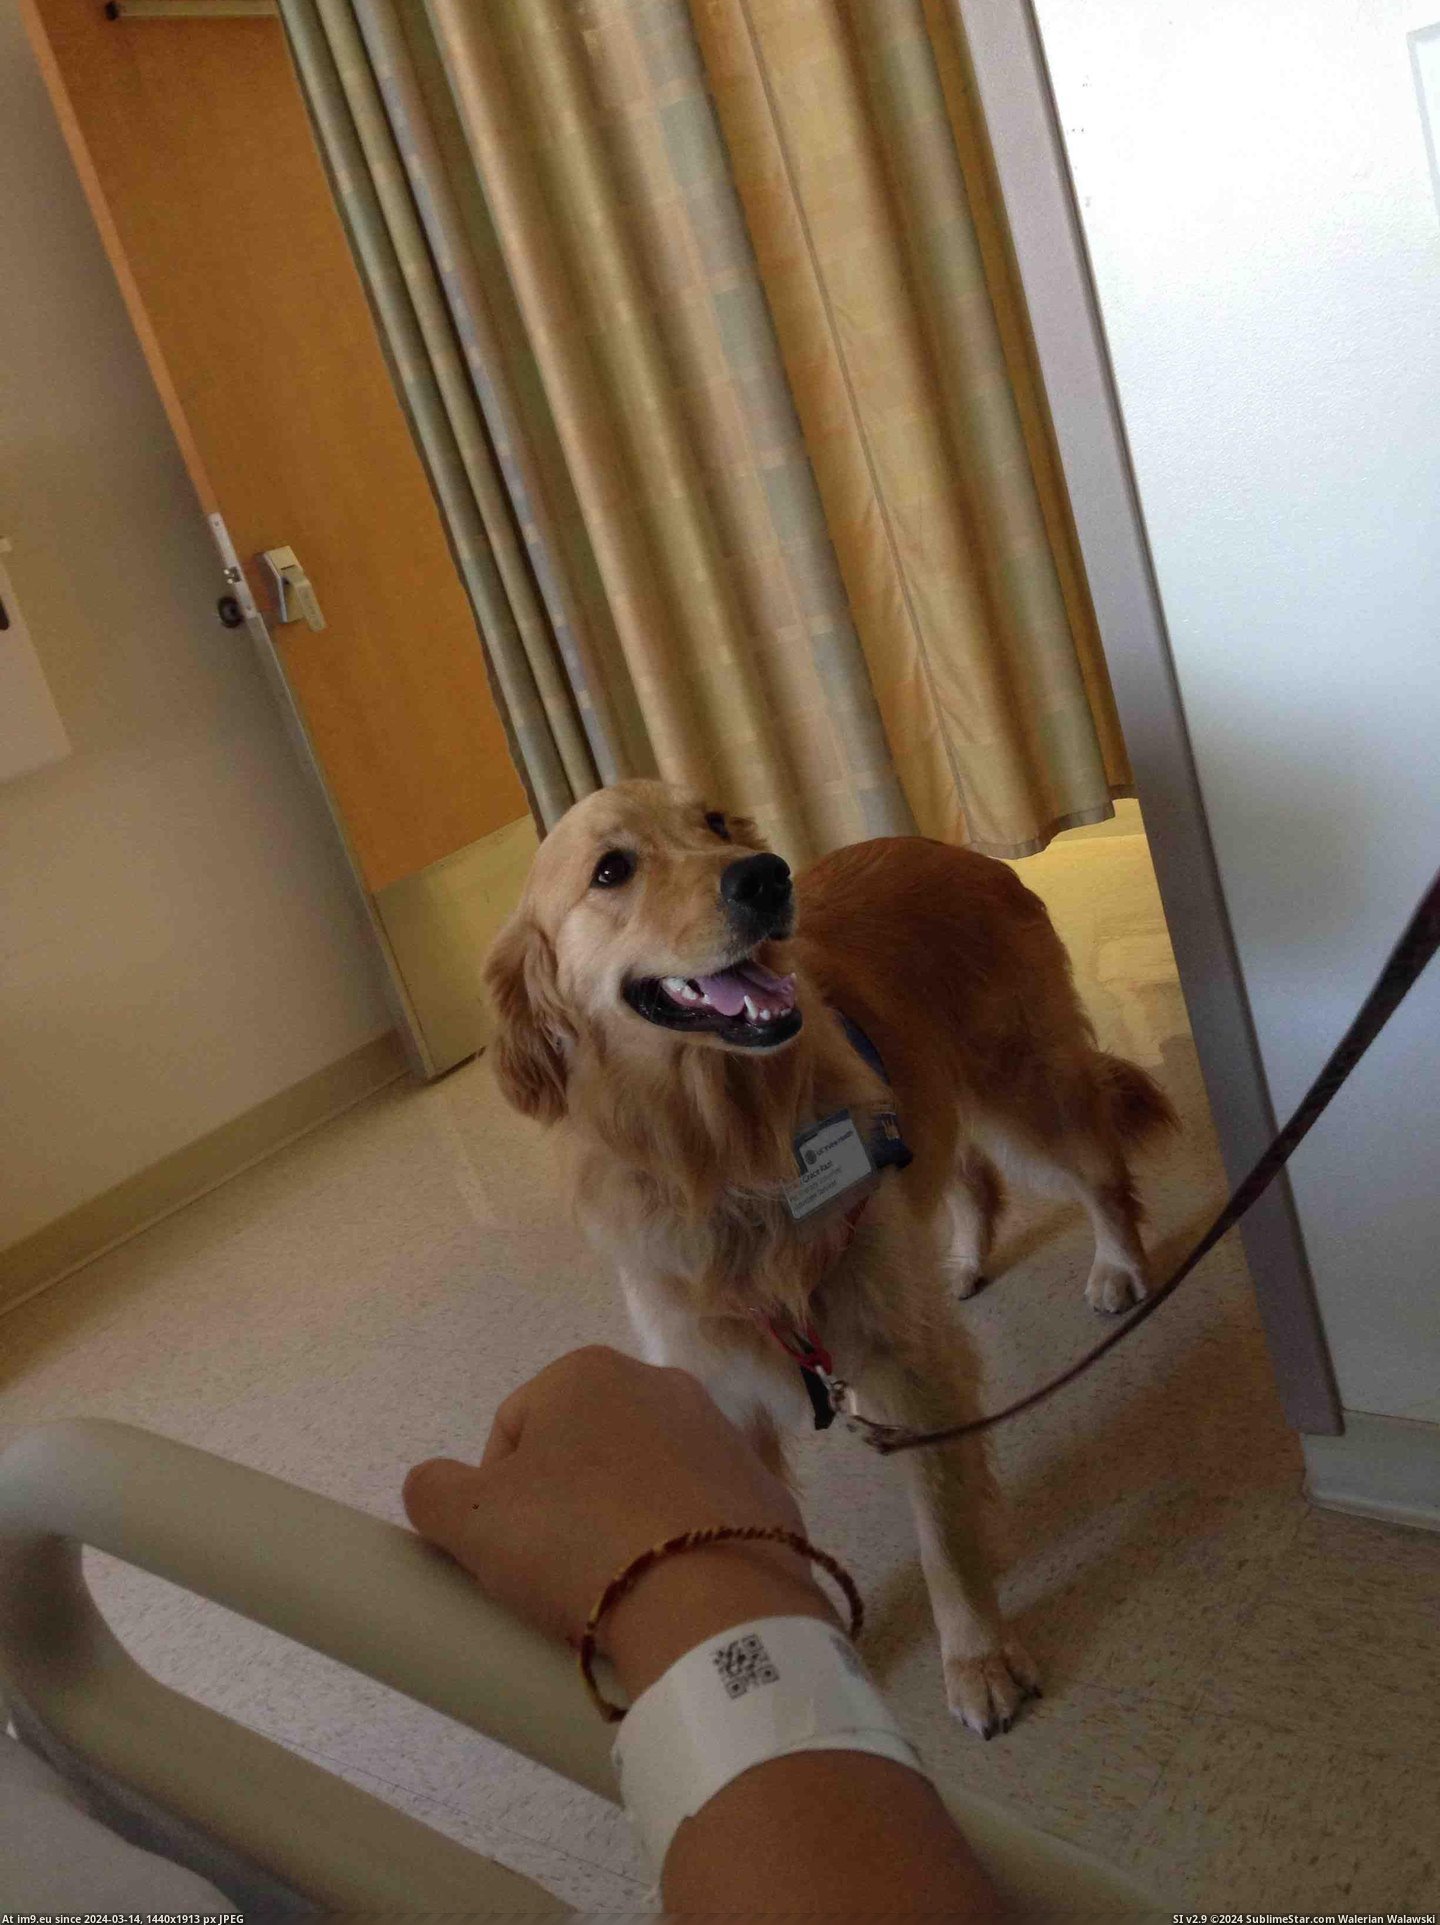 #Day #Bed #Dog #Molly #Therapy #Stay #Rest #Hospital [Aww] going on day four of bed rest in a hospital. Molly the therapy dog made my stay so much better! Pic. (Obraz z album My r/AWW favs))